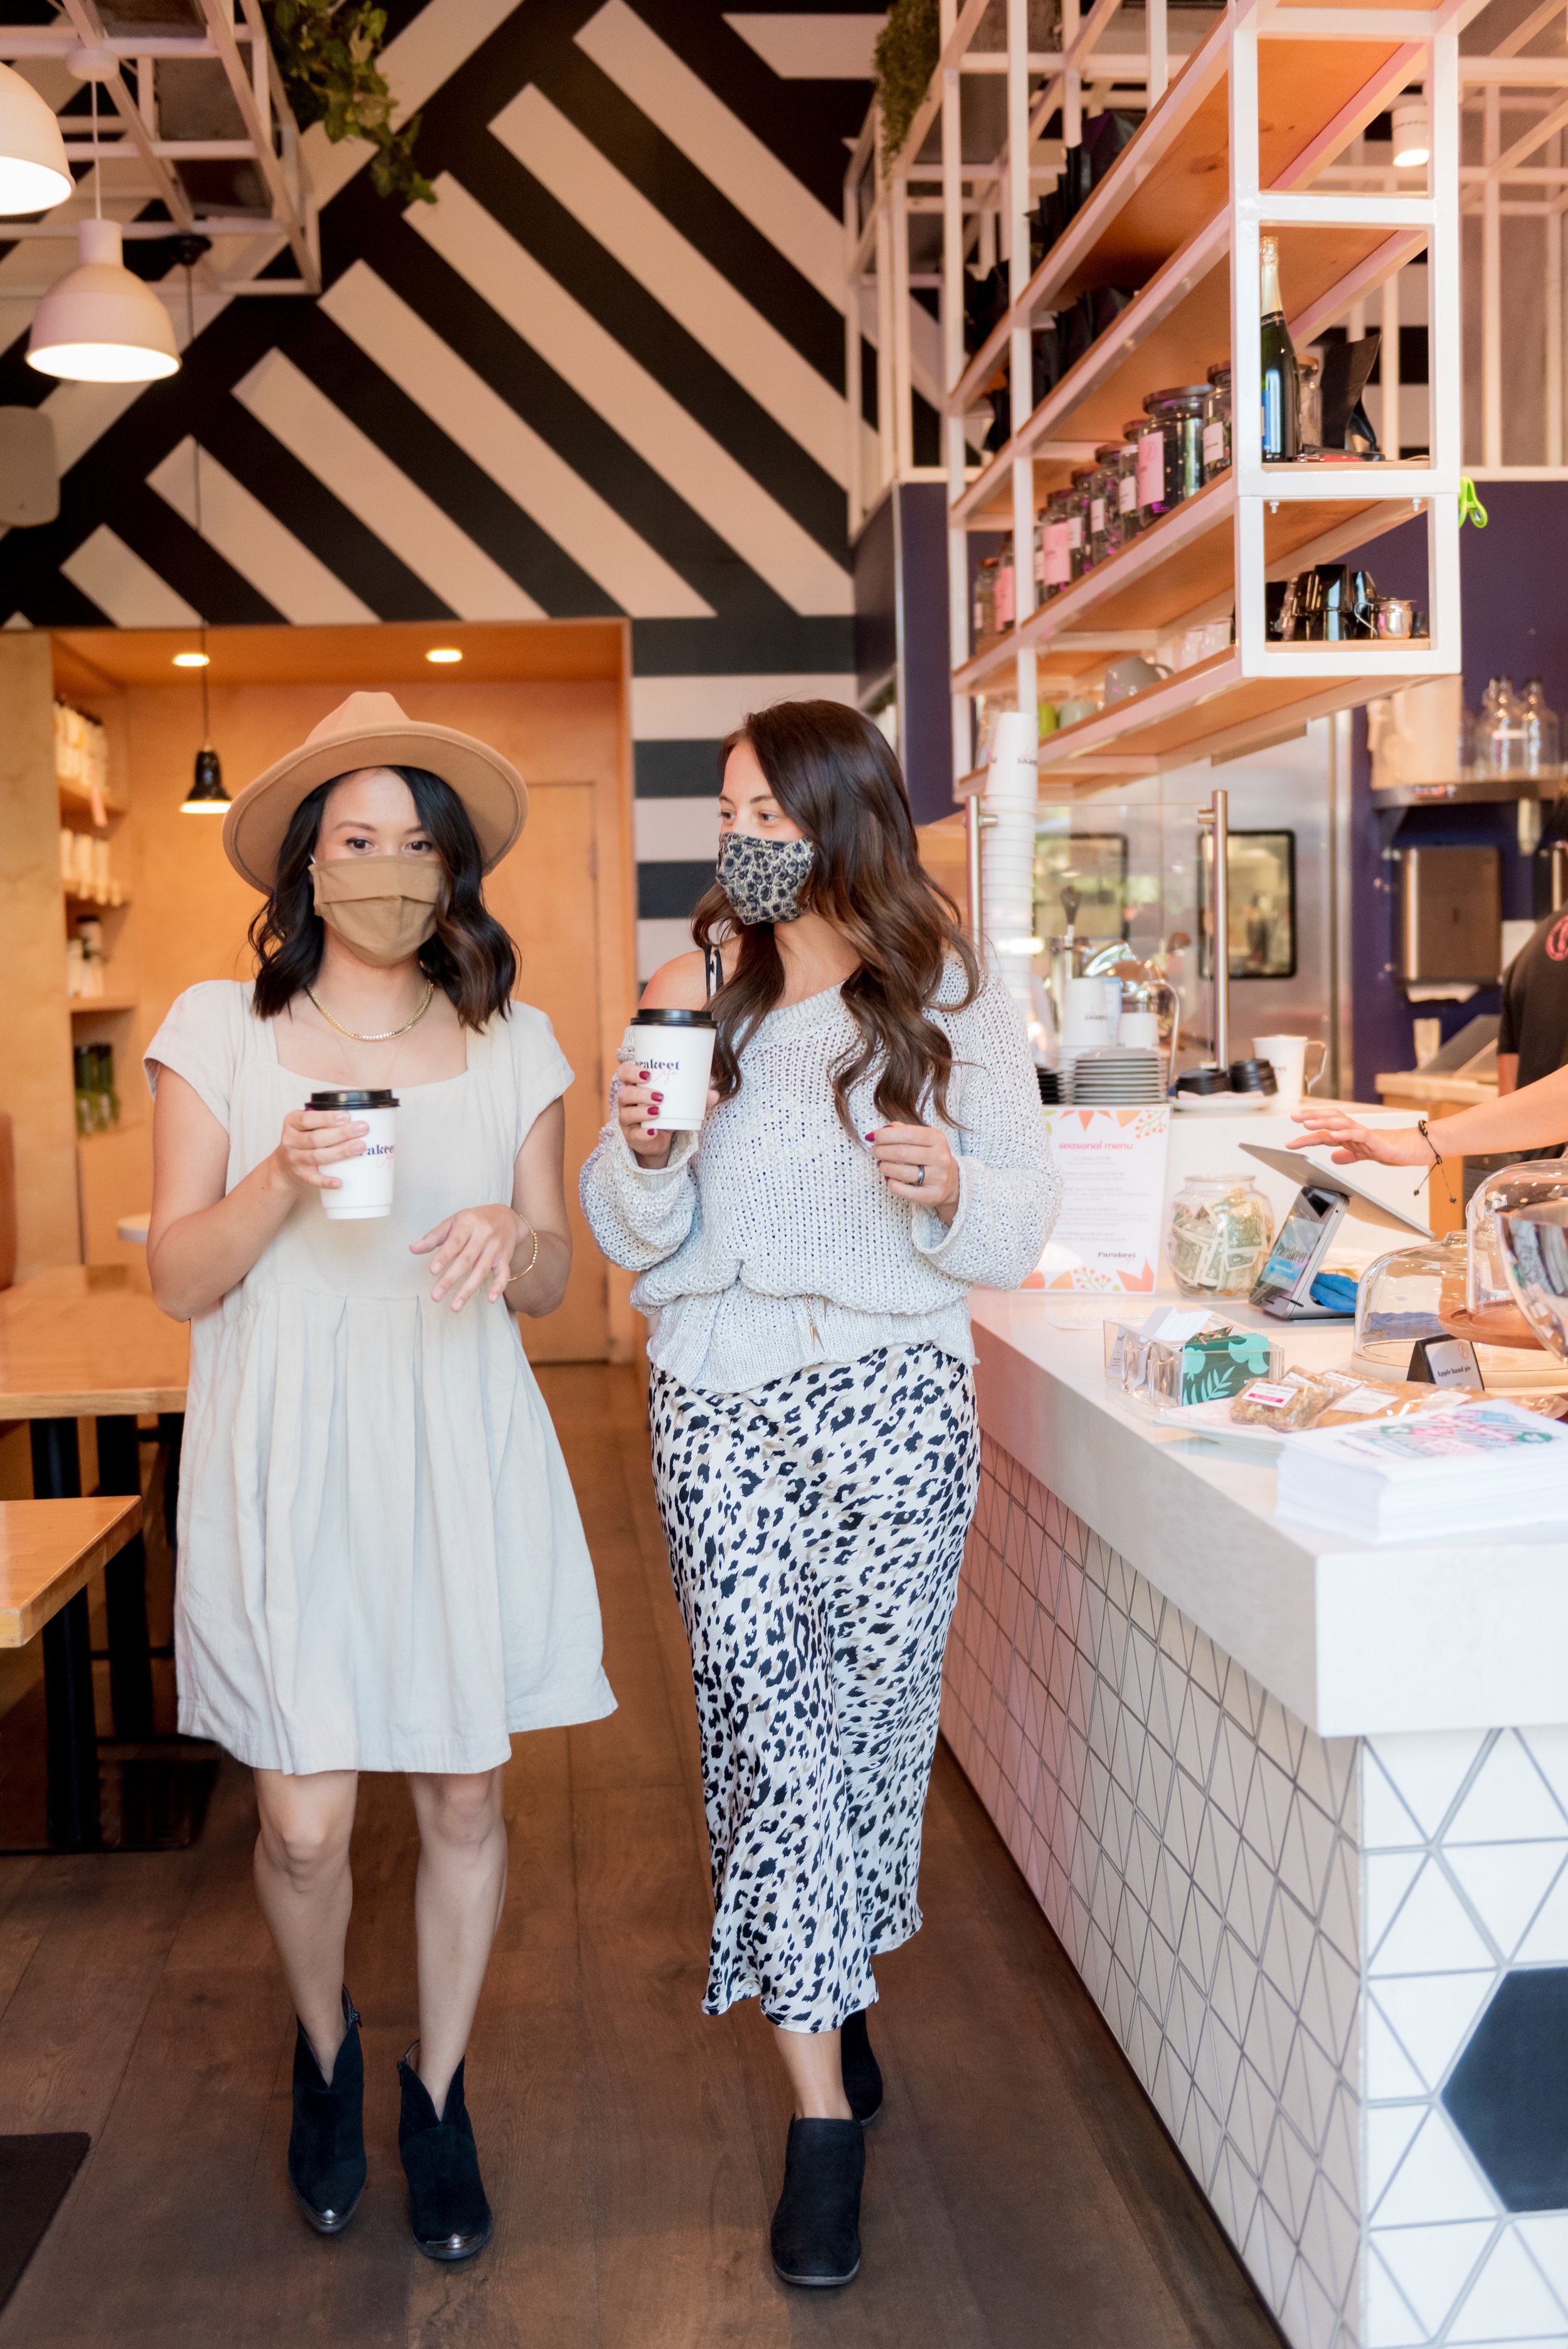 Instagrammable coffee shops in San Diego for personal branding photos-2.jpg